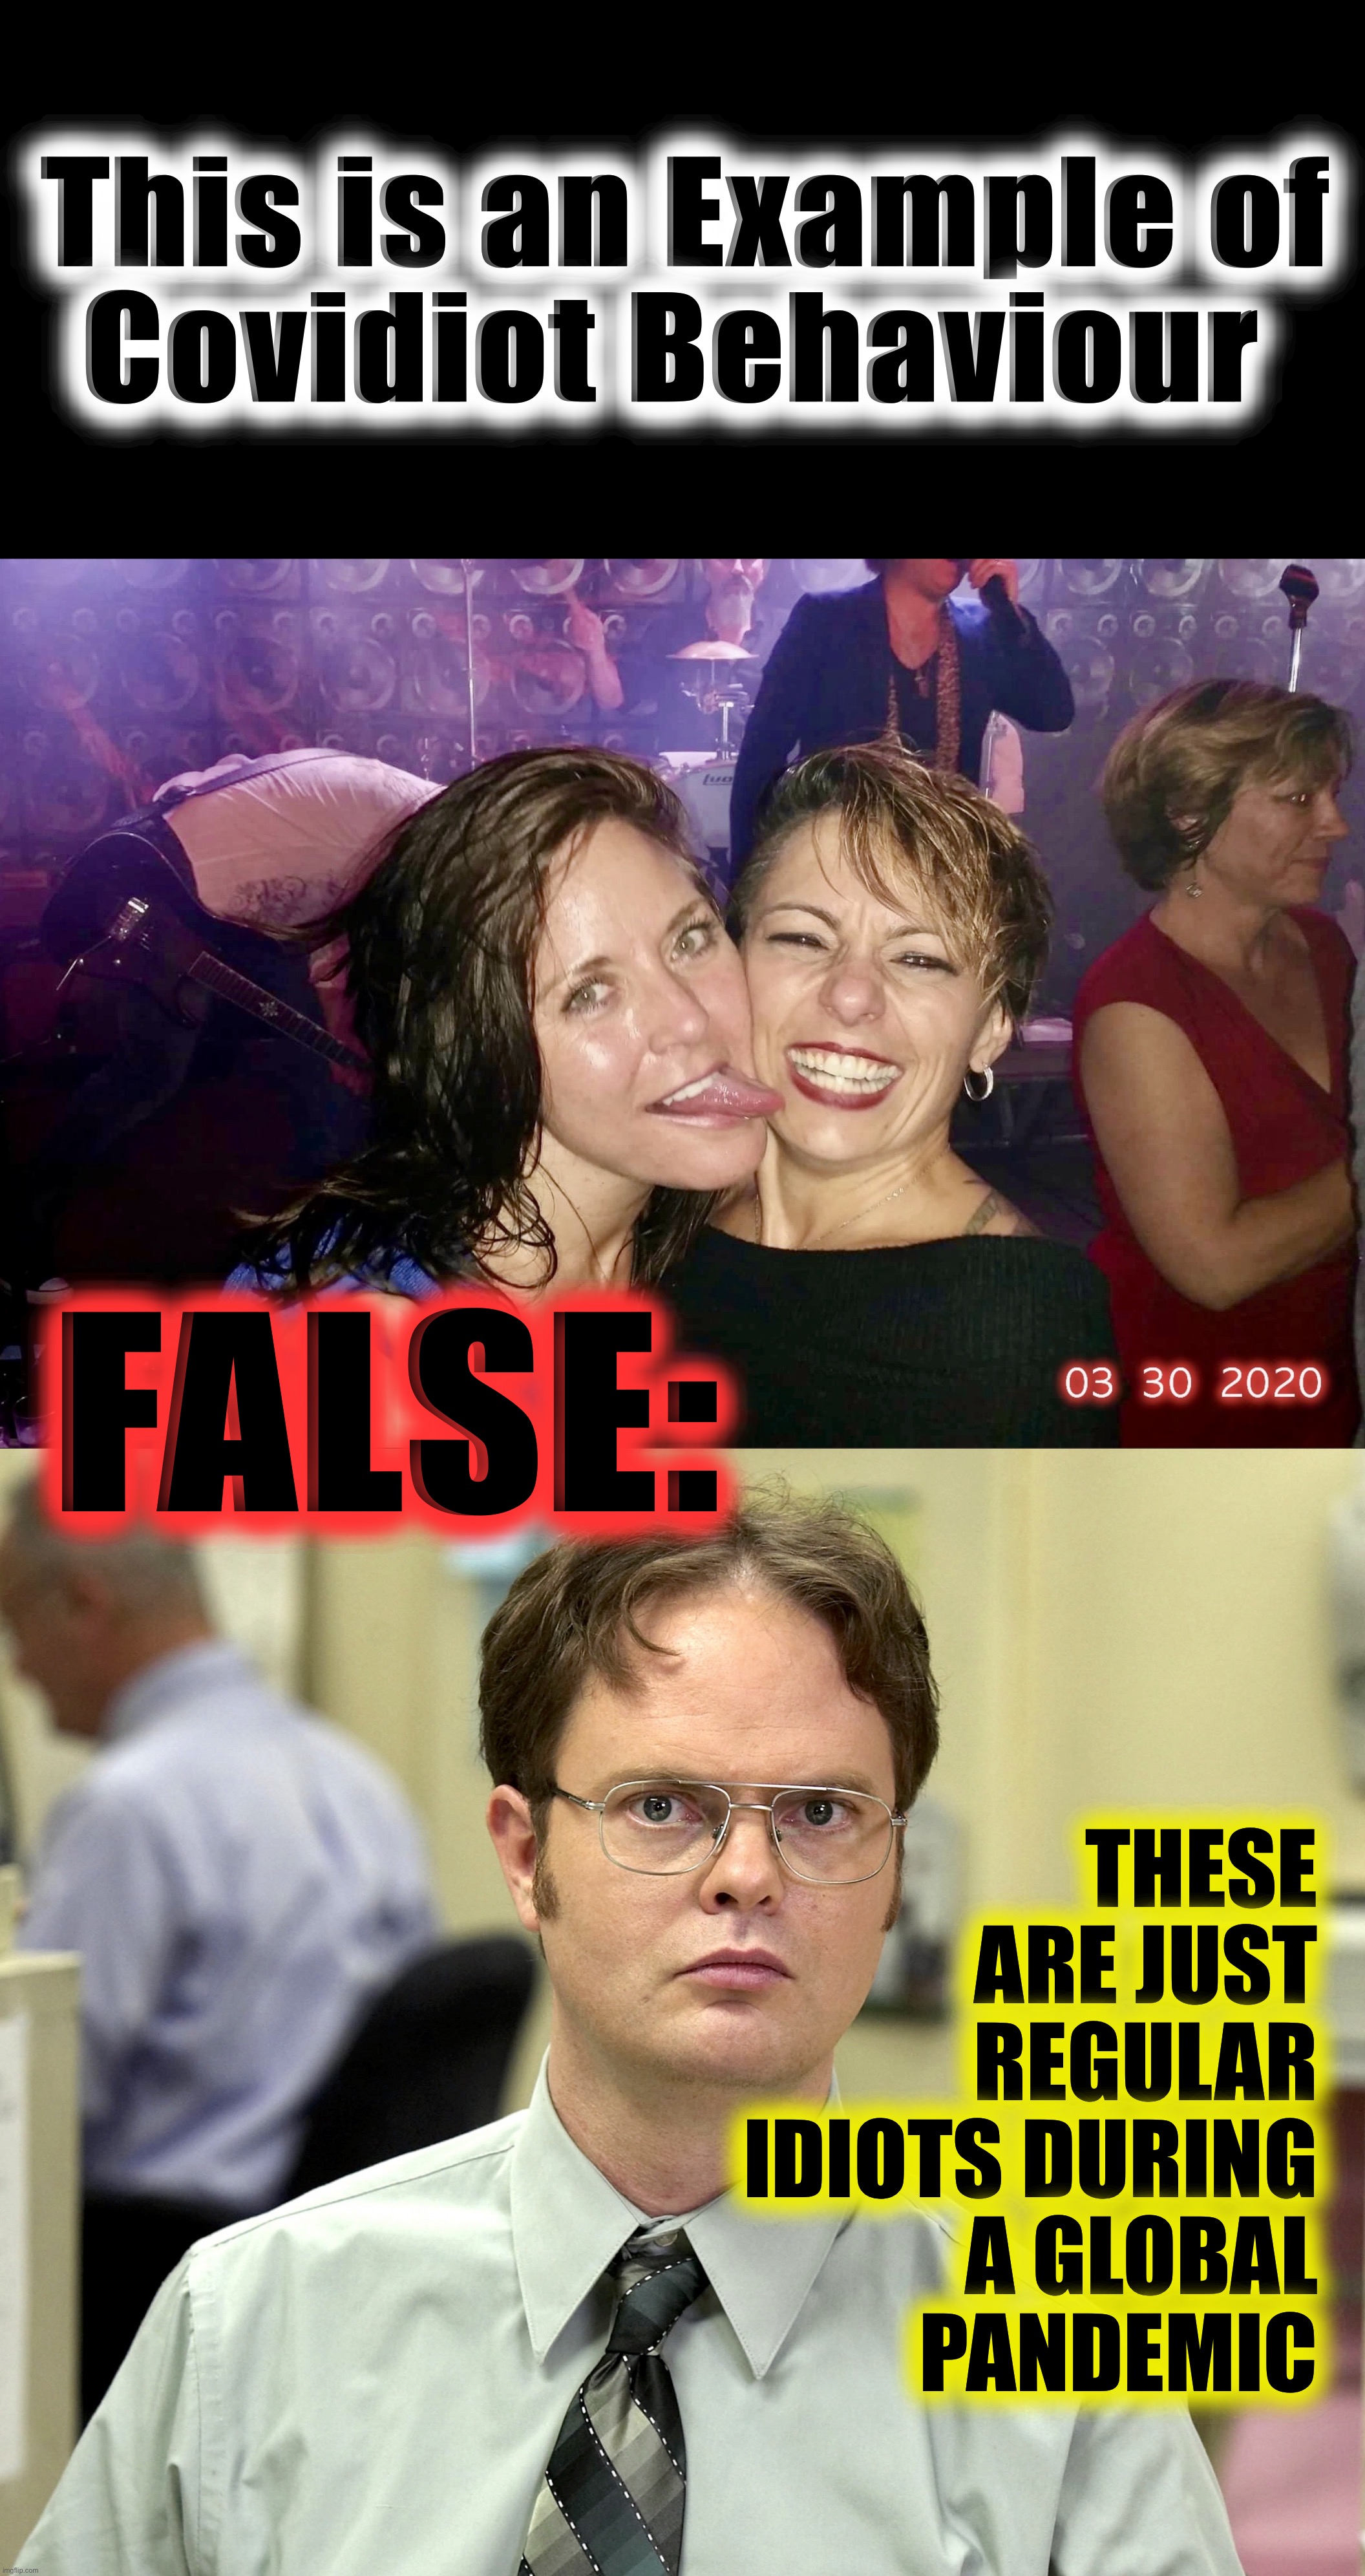 Dwight Explains | This is an Example of
Covidiot Behaviour; FALSE:; THESE ARE JUST REGULAR IDIOTS DURING A GLOBAL PANDEMIC | image tagged in covidiots,dwight schrute,dwight false,memes,coronavirus meme,idiots | made w/ Imgflip meme maker